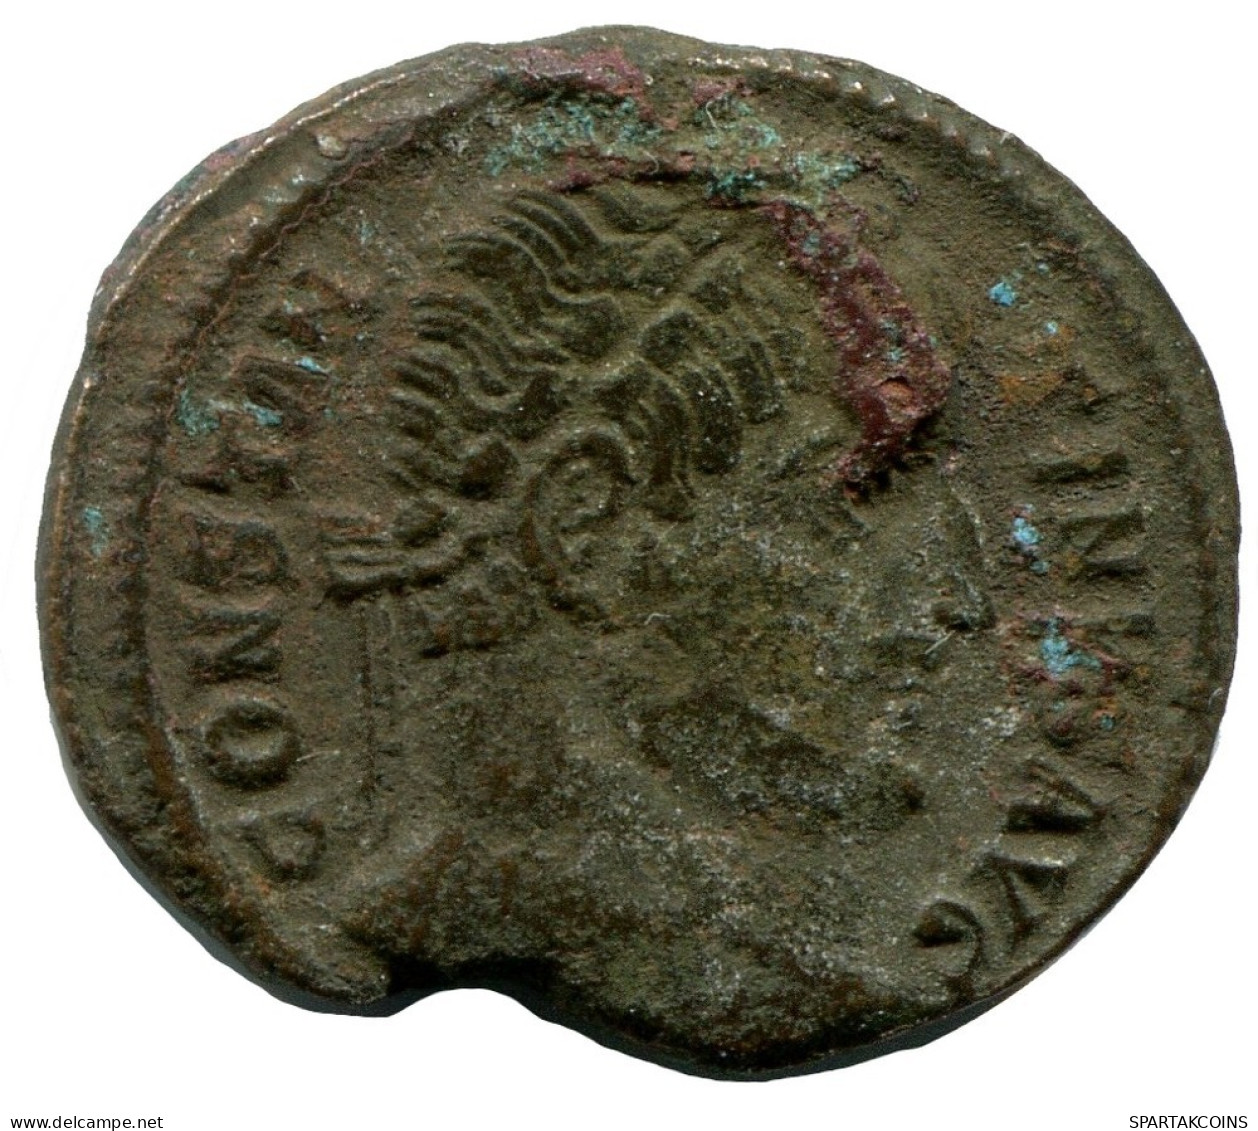 CONSTANTINE I MINTED IN ANTIOCH FOUND IN IHNASYAH HOARD EGYPT #ANC10613.14.D.A - The Christian Empire (307 AD To 363 AD)